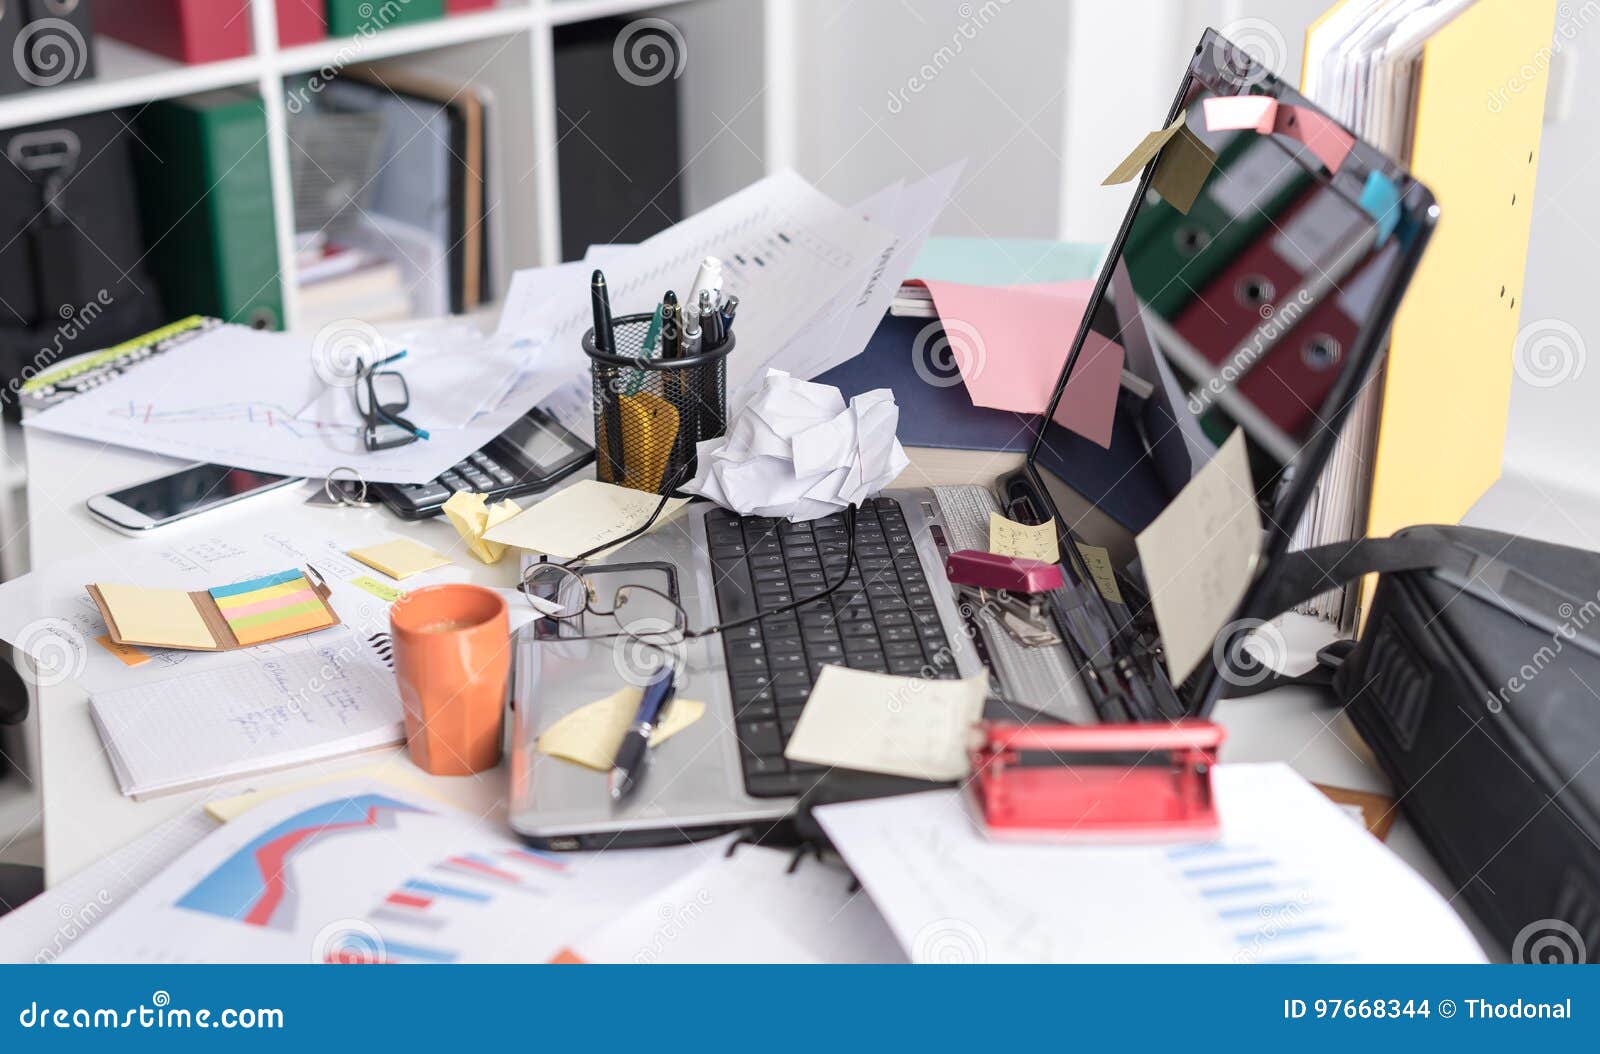 Messy and cluttered desk — Stock Photo © thodonal #160076284